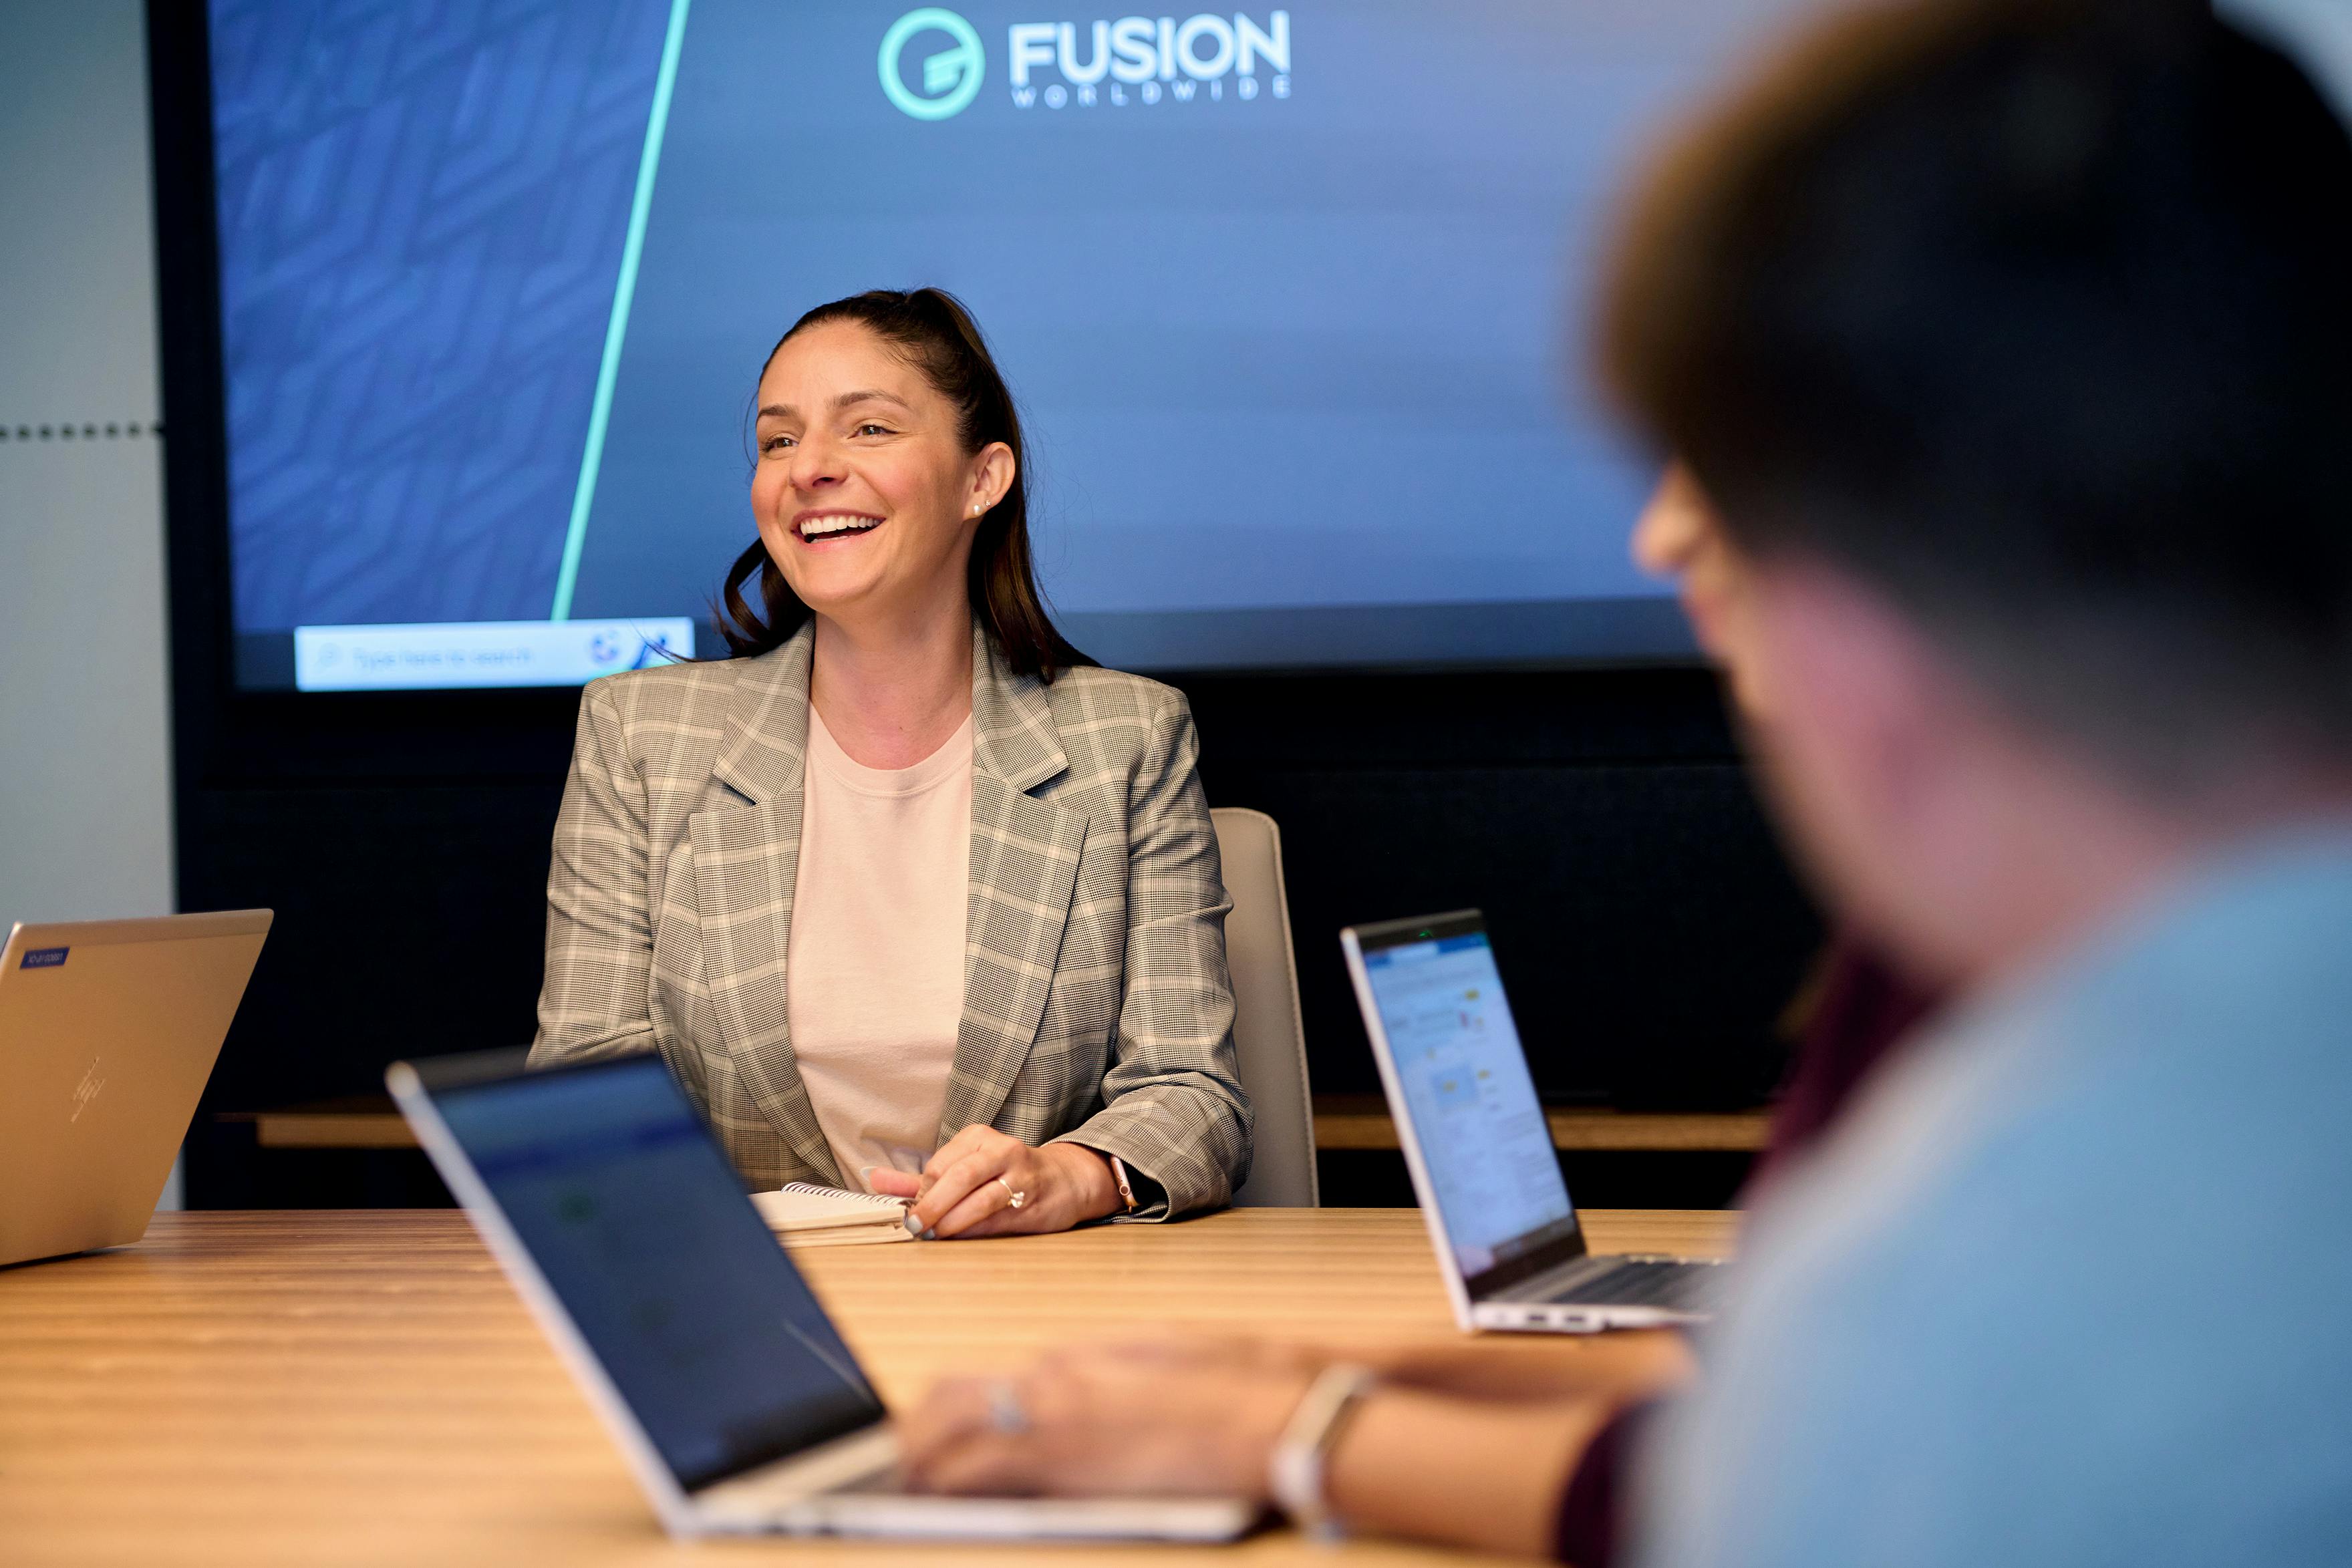 A bright young Fusion employee laughs joyfully, seated at the head of a conference room table